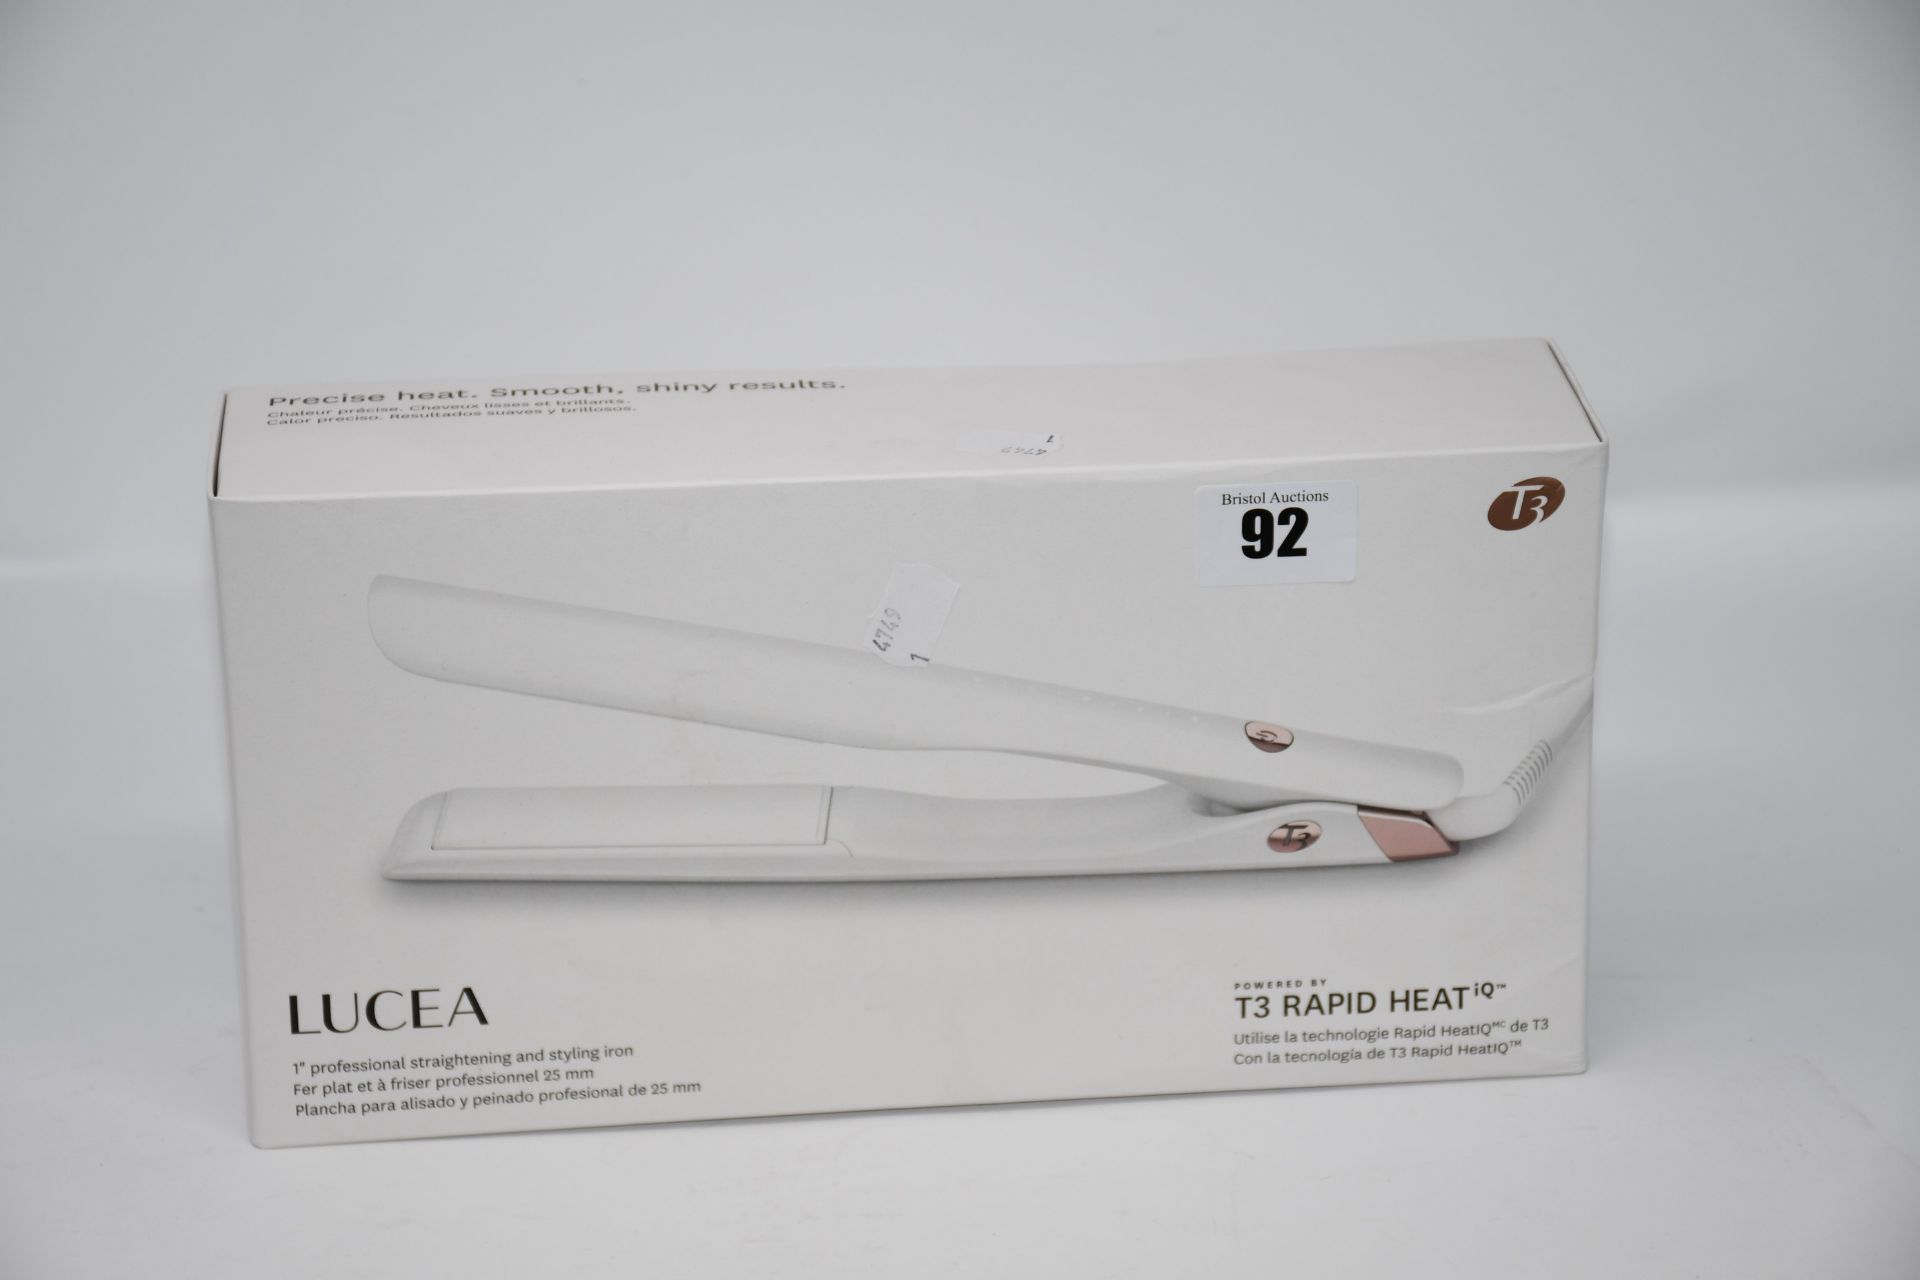 One boxed Lucea hair straightening and styling iron.